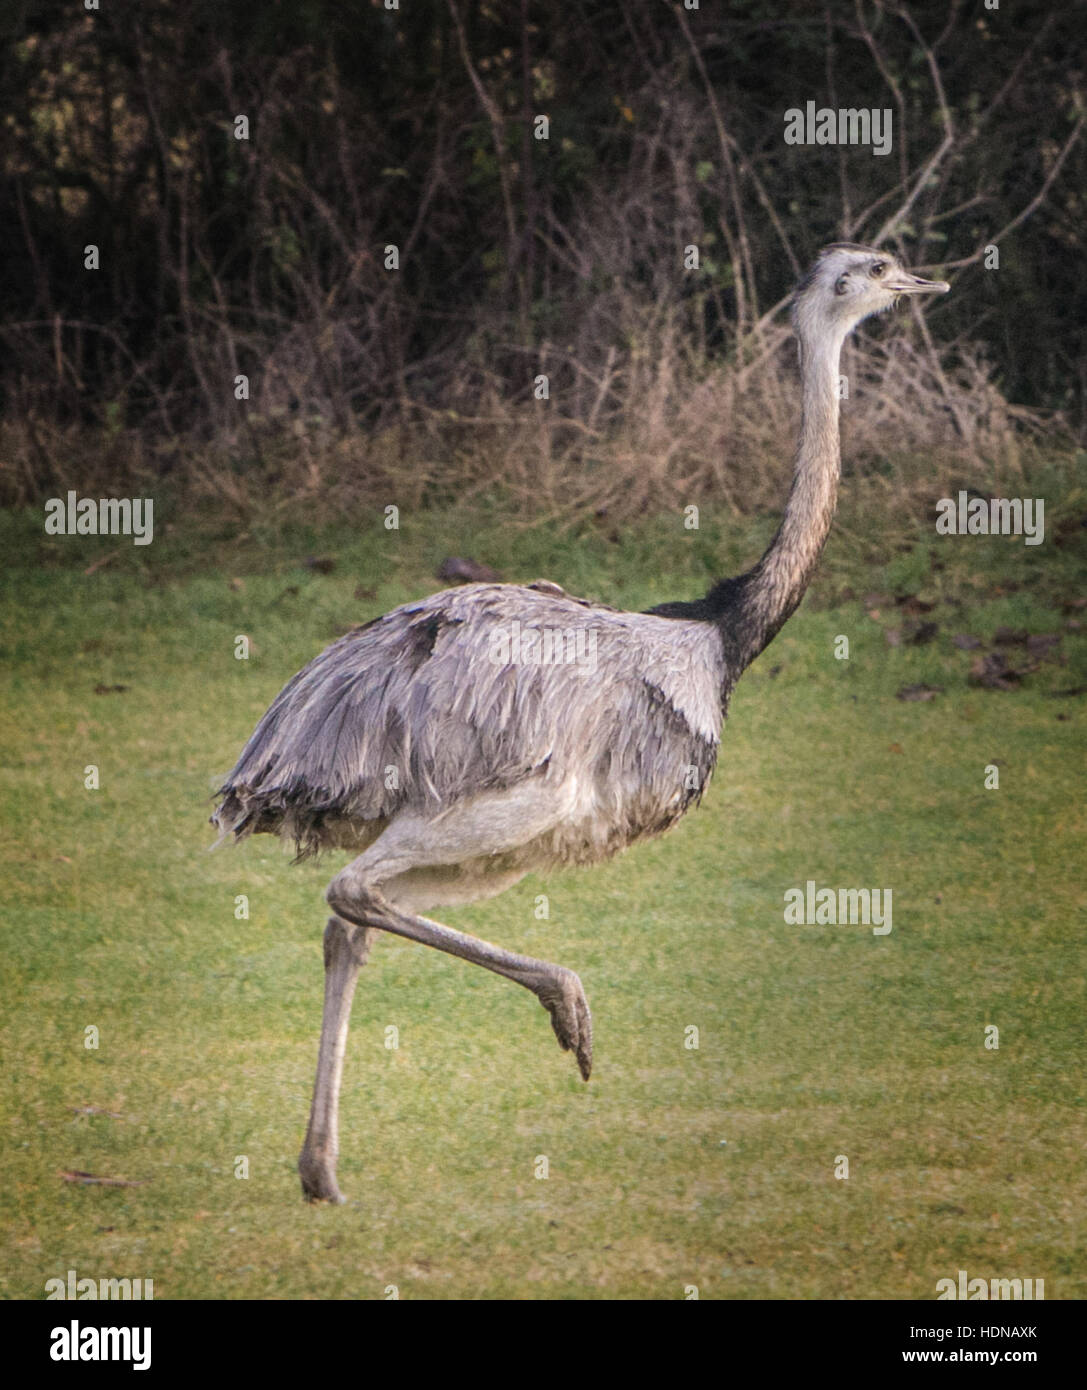 Essex, UK. 14th Dec, 2016. RITA, a 3 year old rhea escaped from her pen after being chased by a dog and is now on the run in the Stock Photo